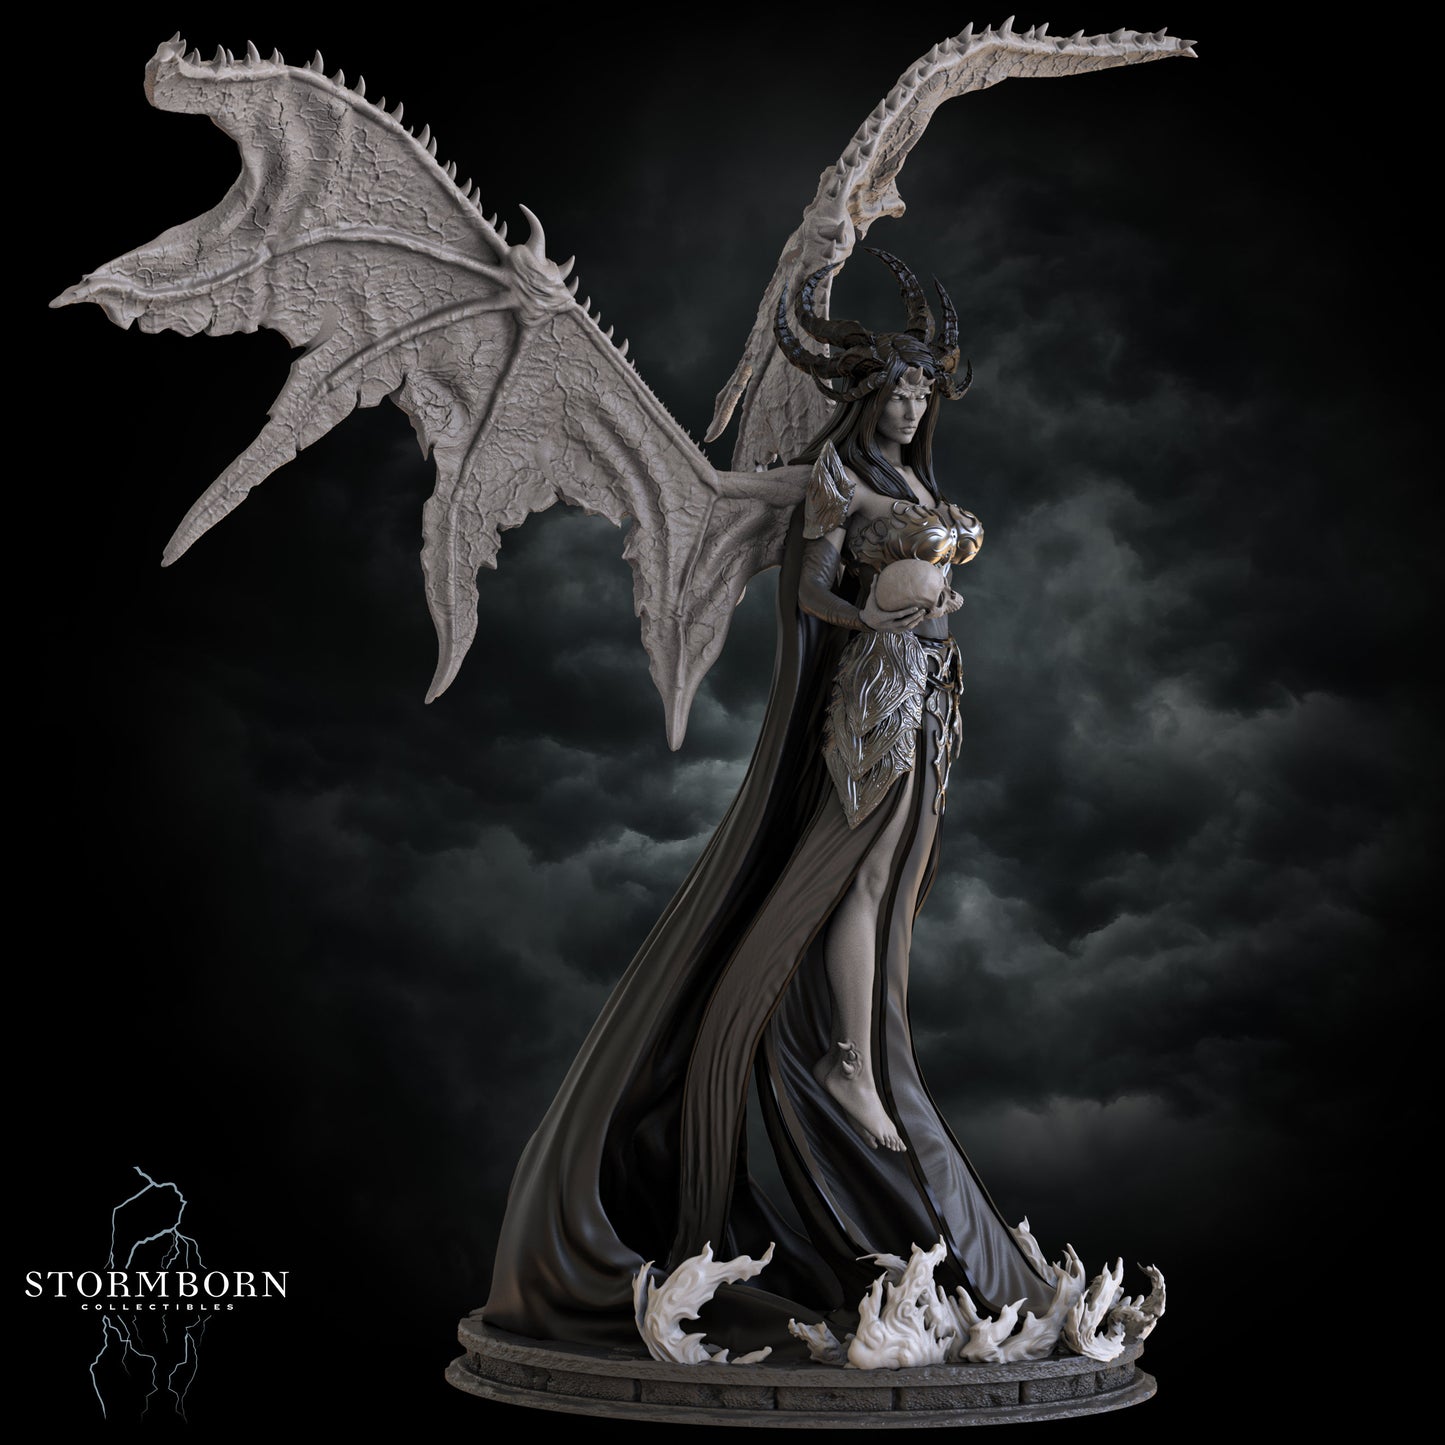 Nyxara | Succubus / She Devil | Large Monster | 32mm or 75mm scale | Resin 3D Printed Miniature | RPG | DND | Stormborn Collectibles